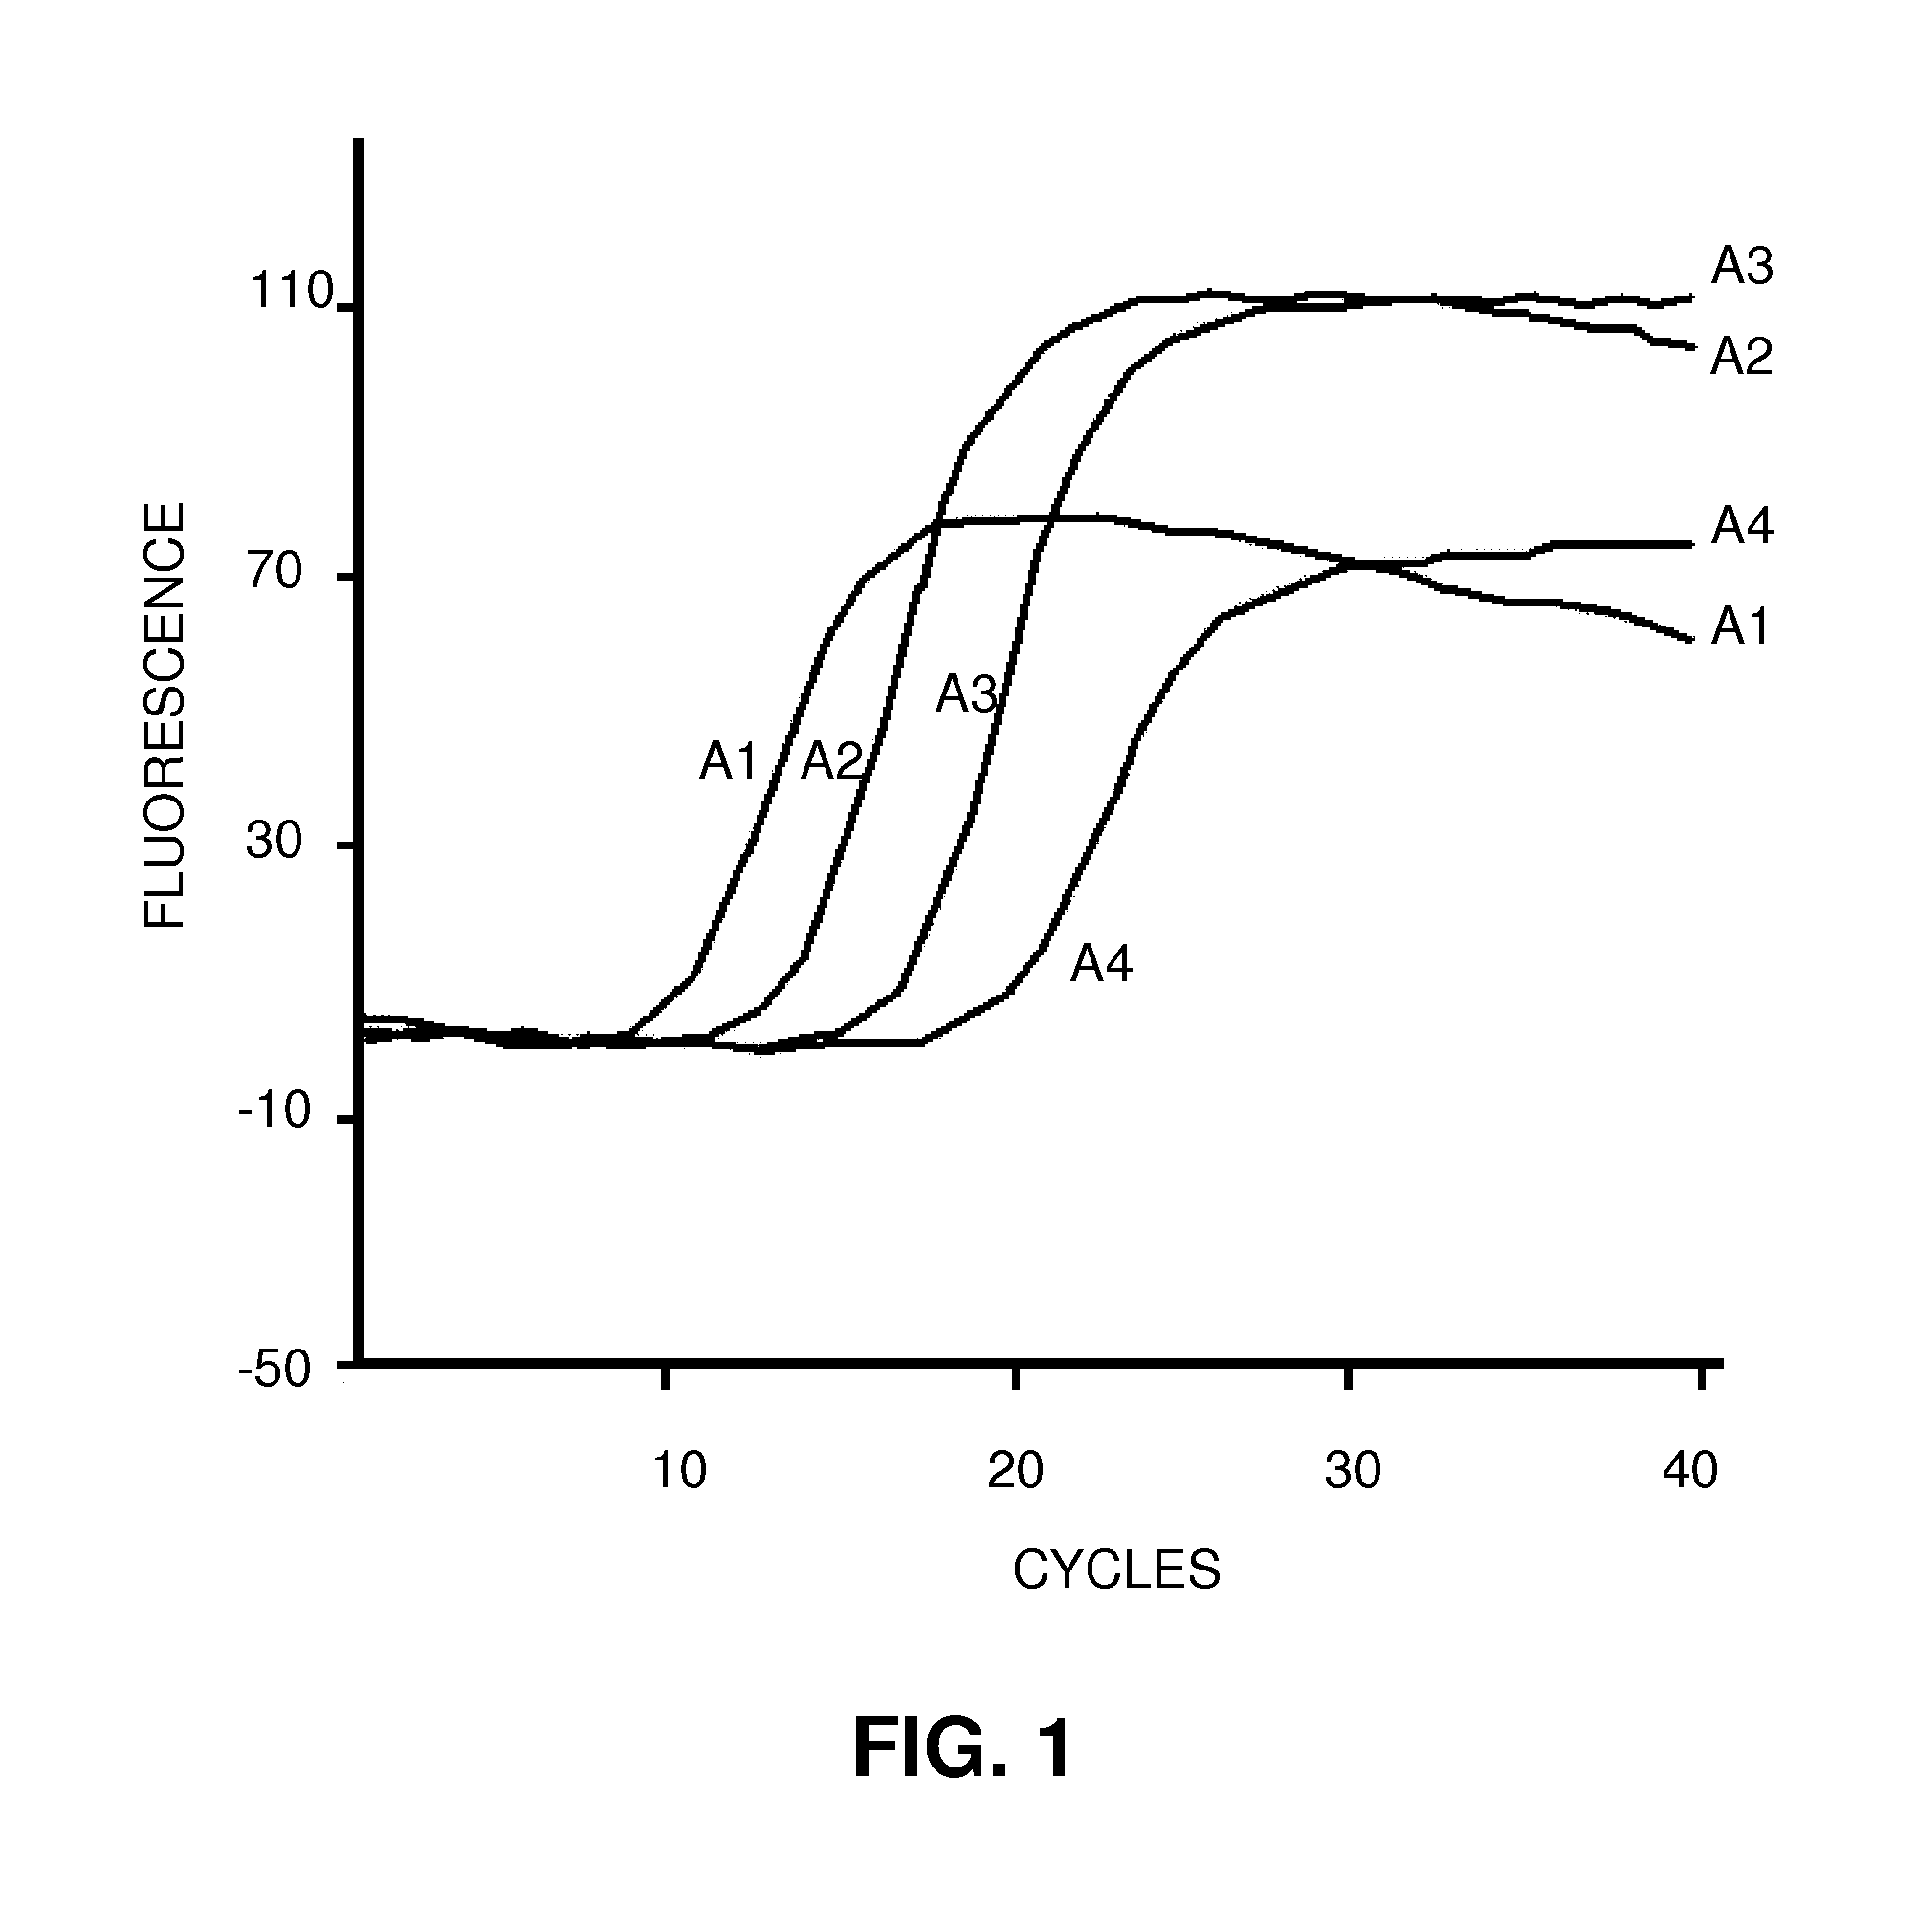 Method for detection and multiple, simultaneous quantification of pathogens by means of real-time polymerase chain reaction